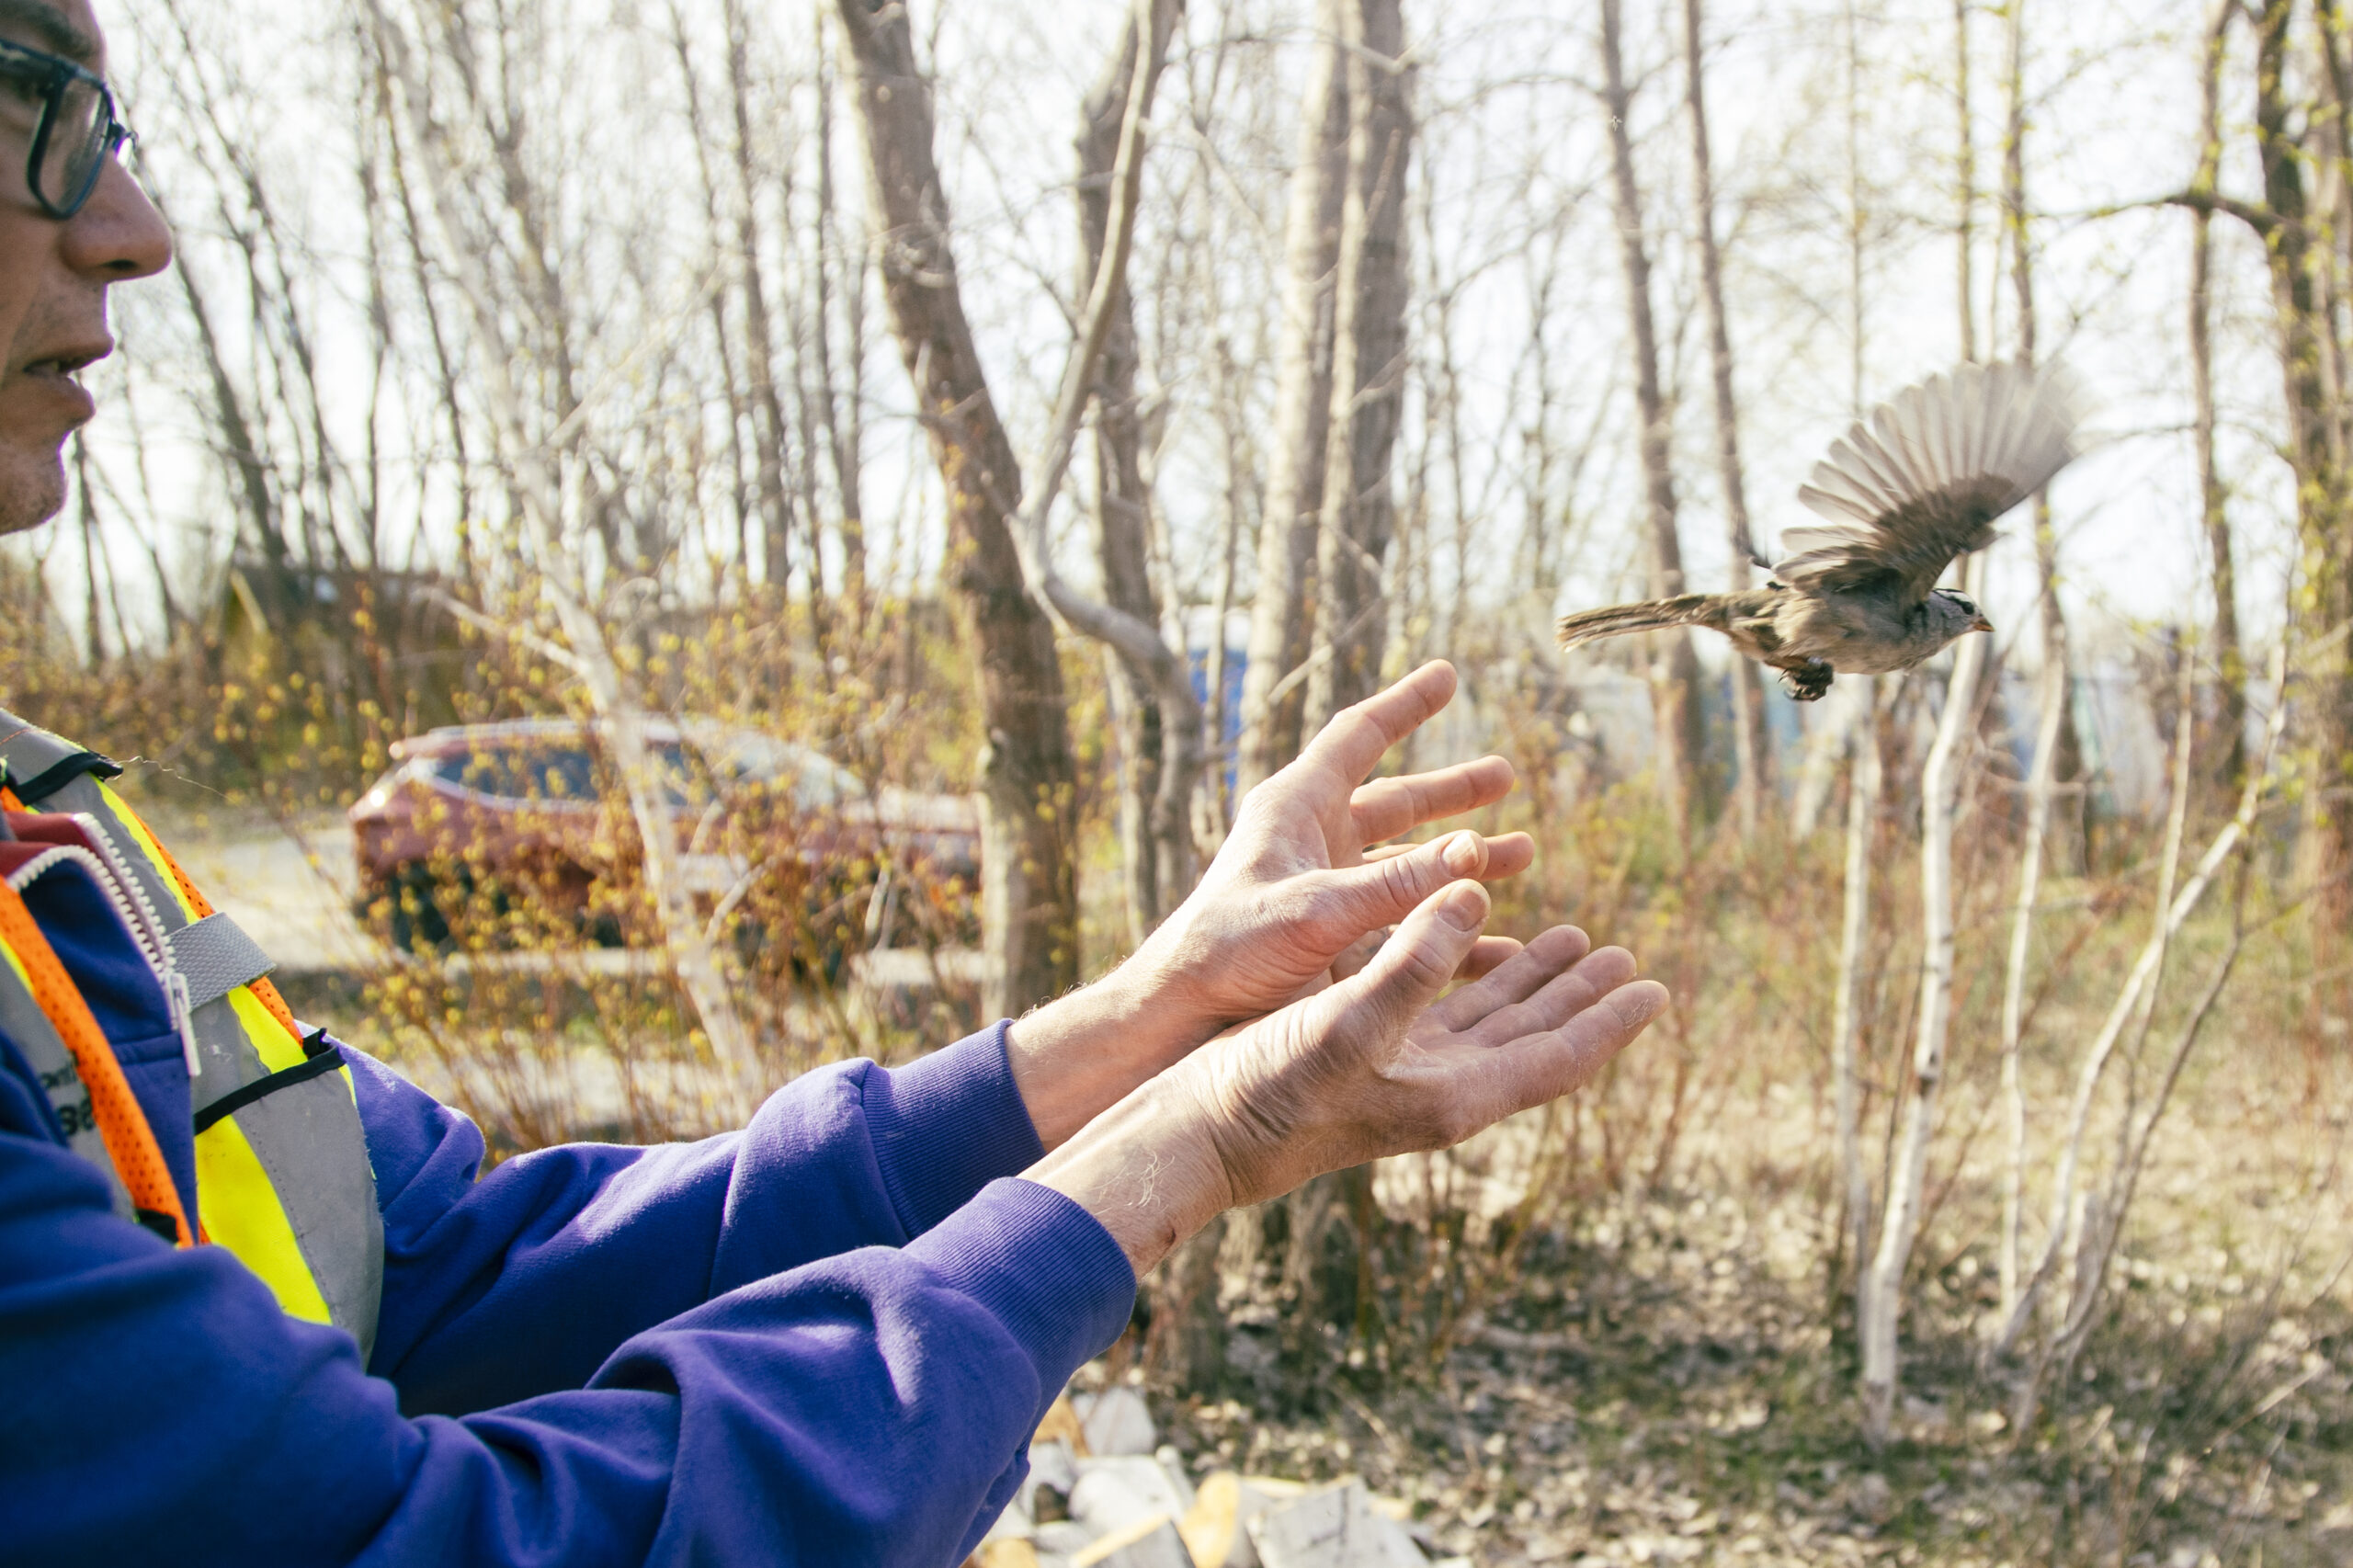 A sparrow flies out of a man's open hands, with forest of Tommy Thompson Park in the background.